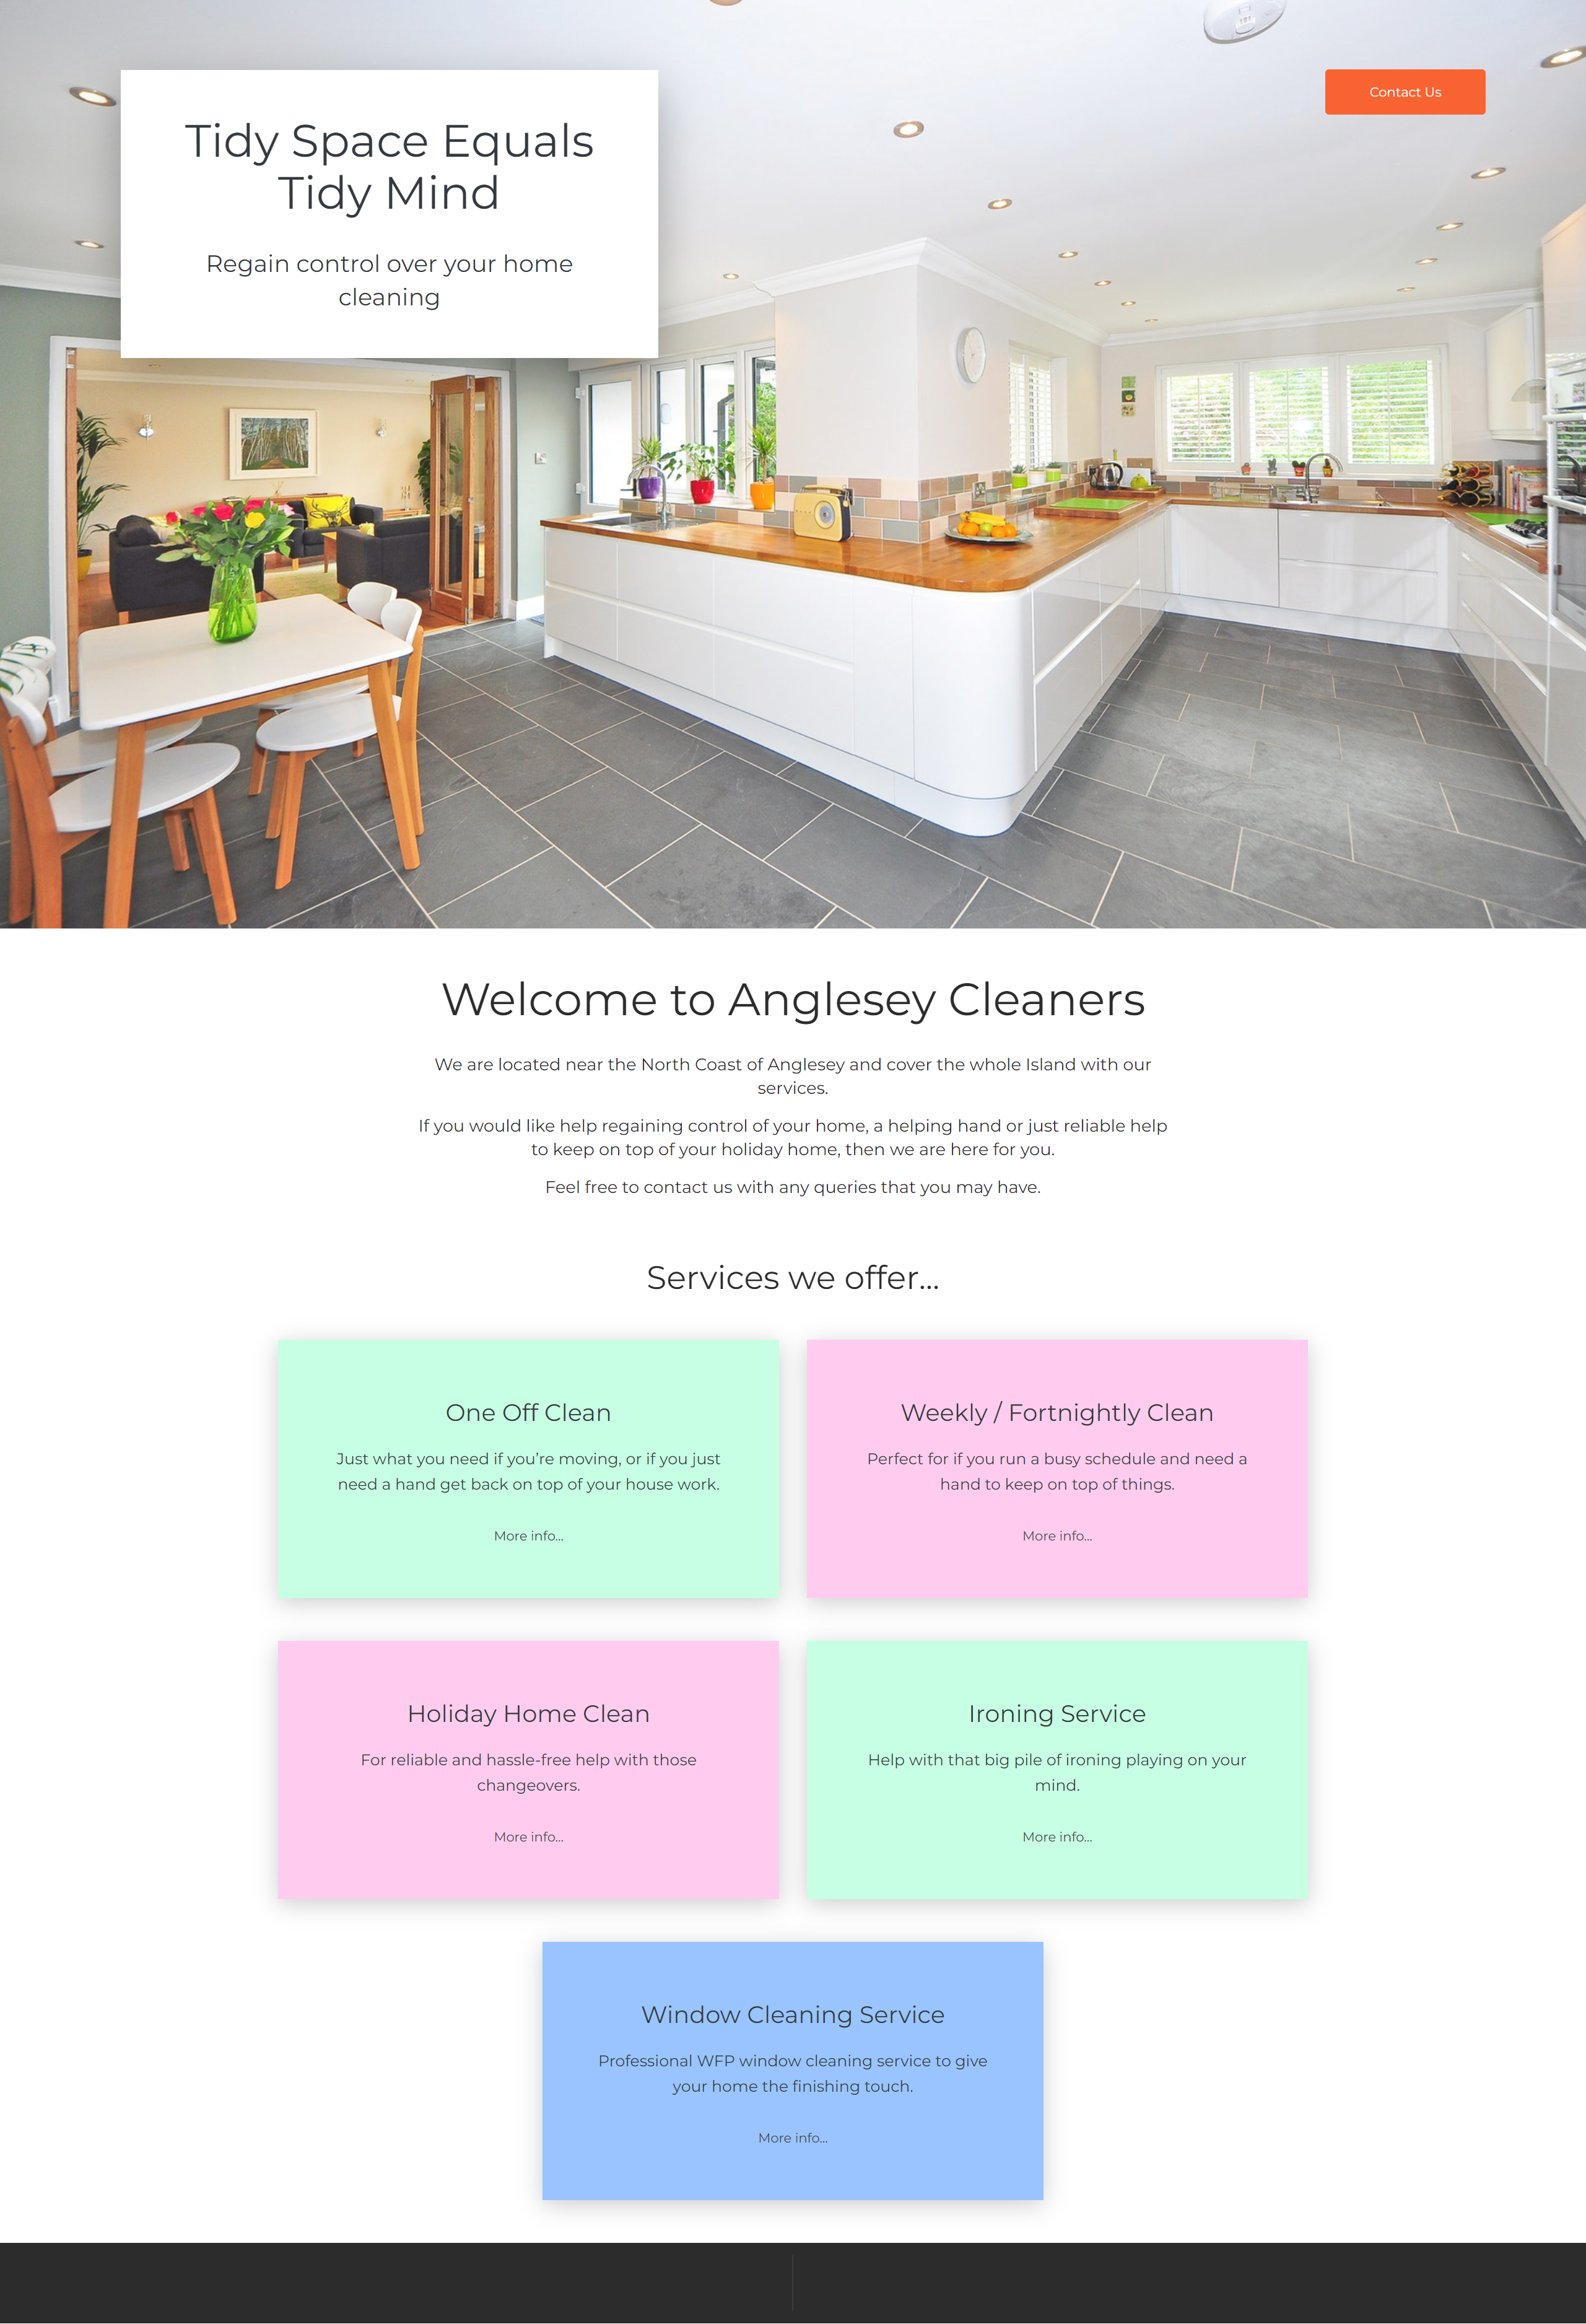 Anglesey Cleaners